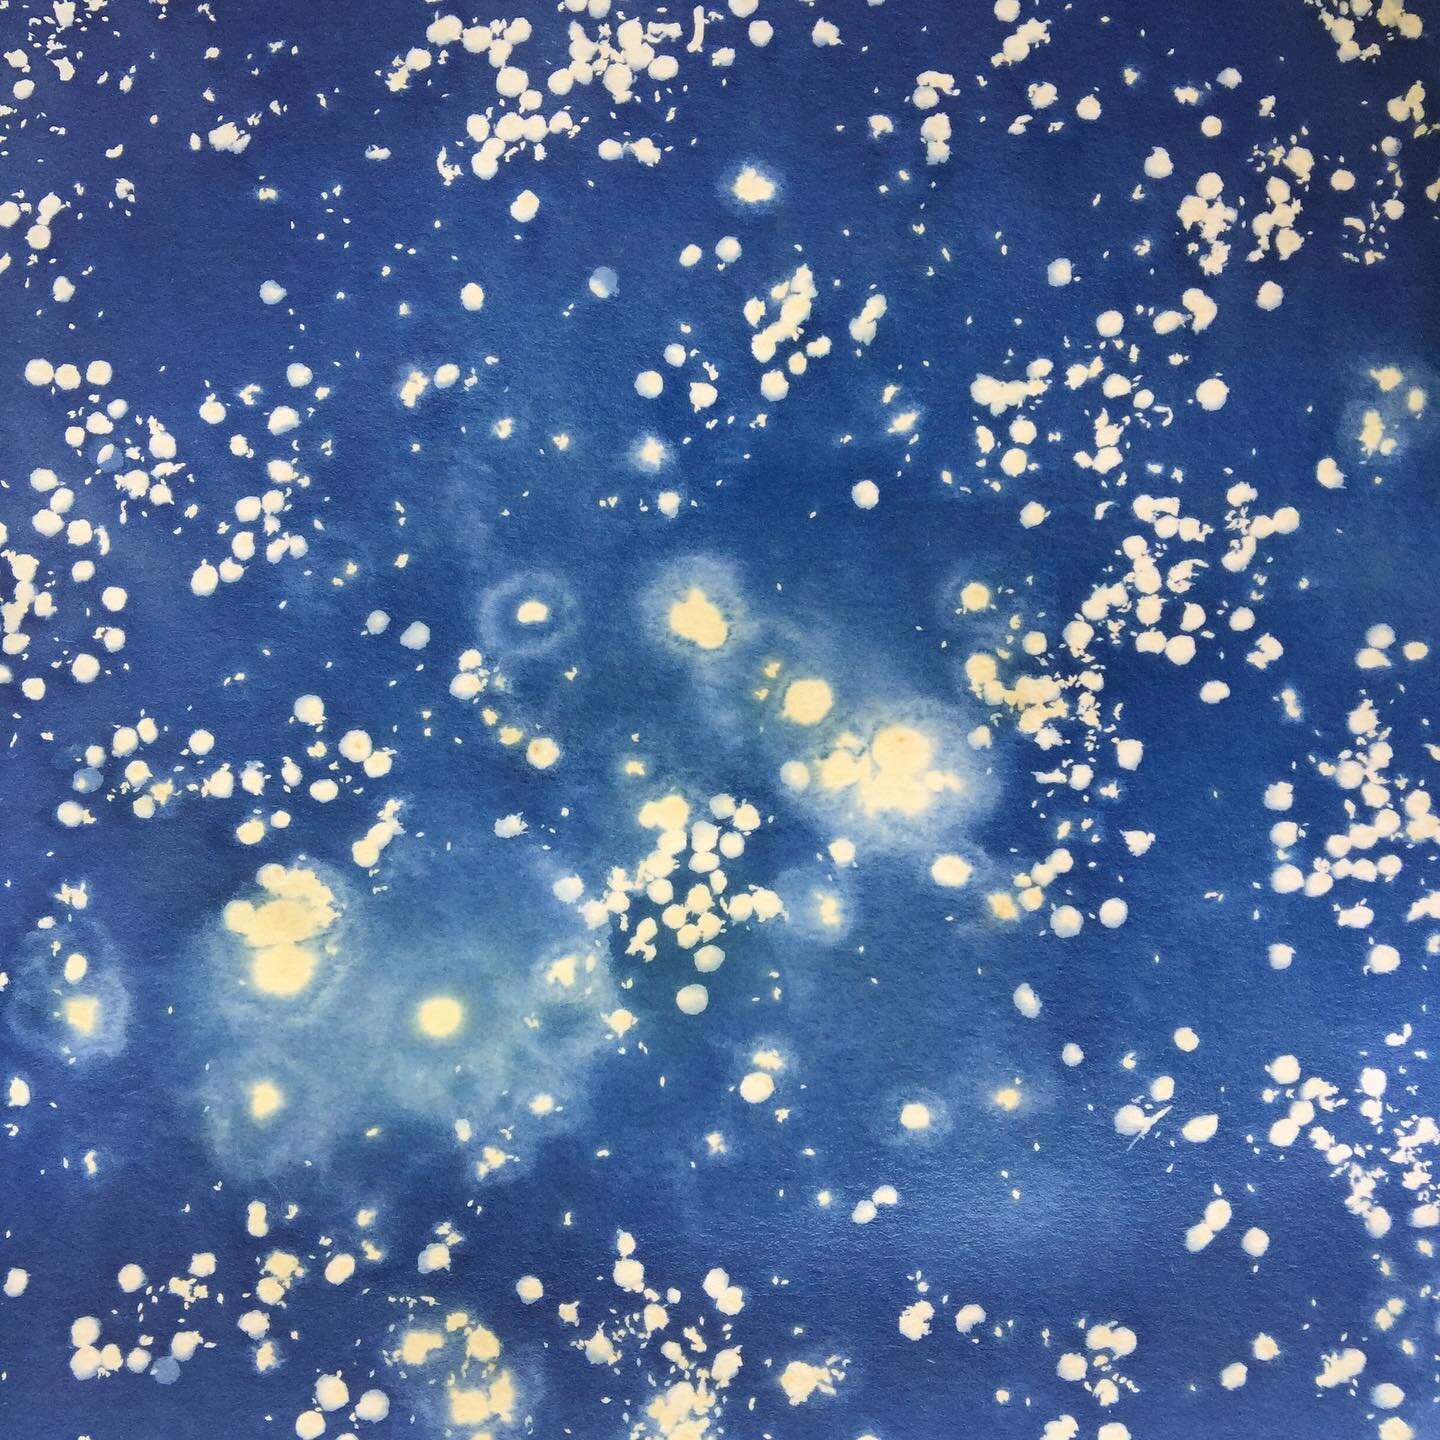 Inspired by my students&rsquo; fascination with cyanotype printing, I decided to try some out. 

Made in collaboration with random lime caterpillars (without their written consent, doh)🐛 #caterpillar #caterpillarpoop #makingpoopsicles